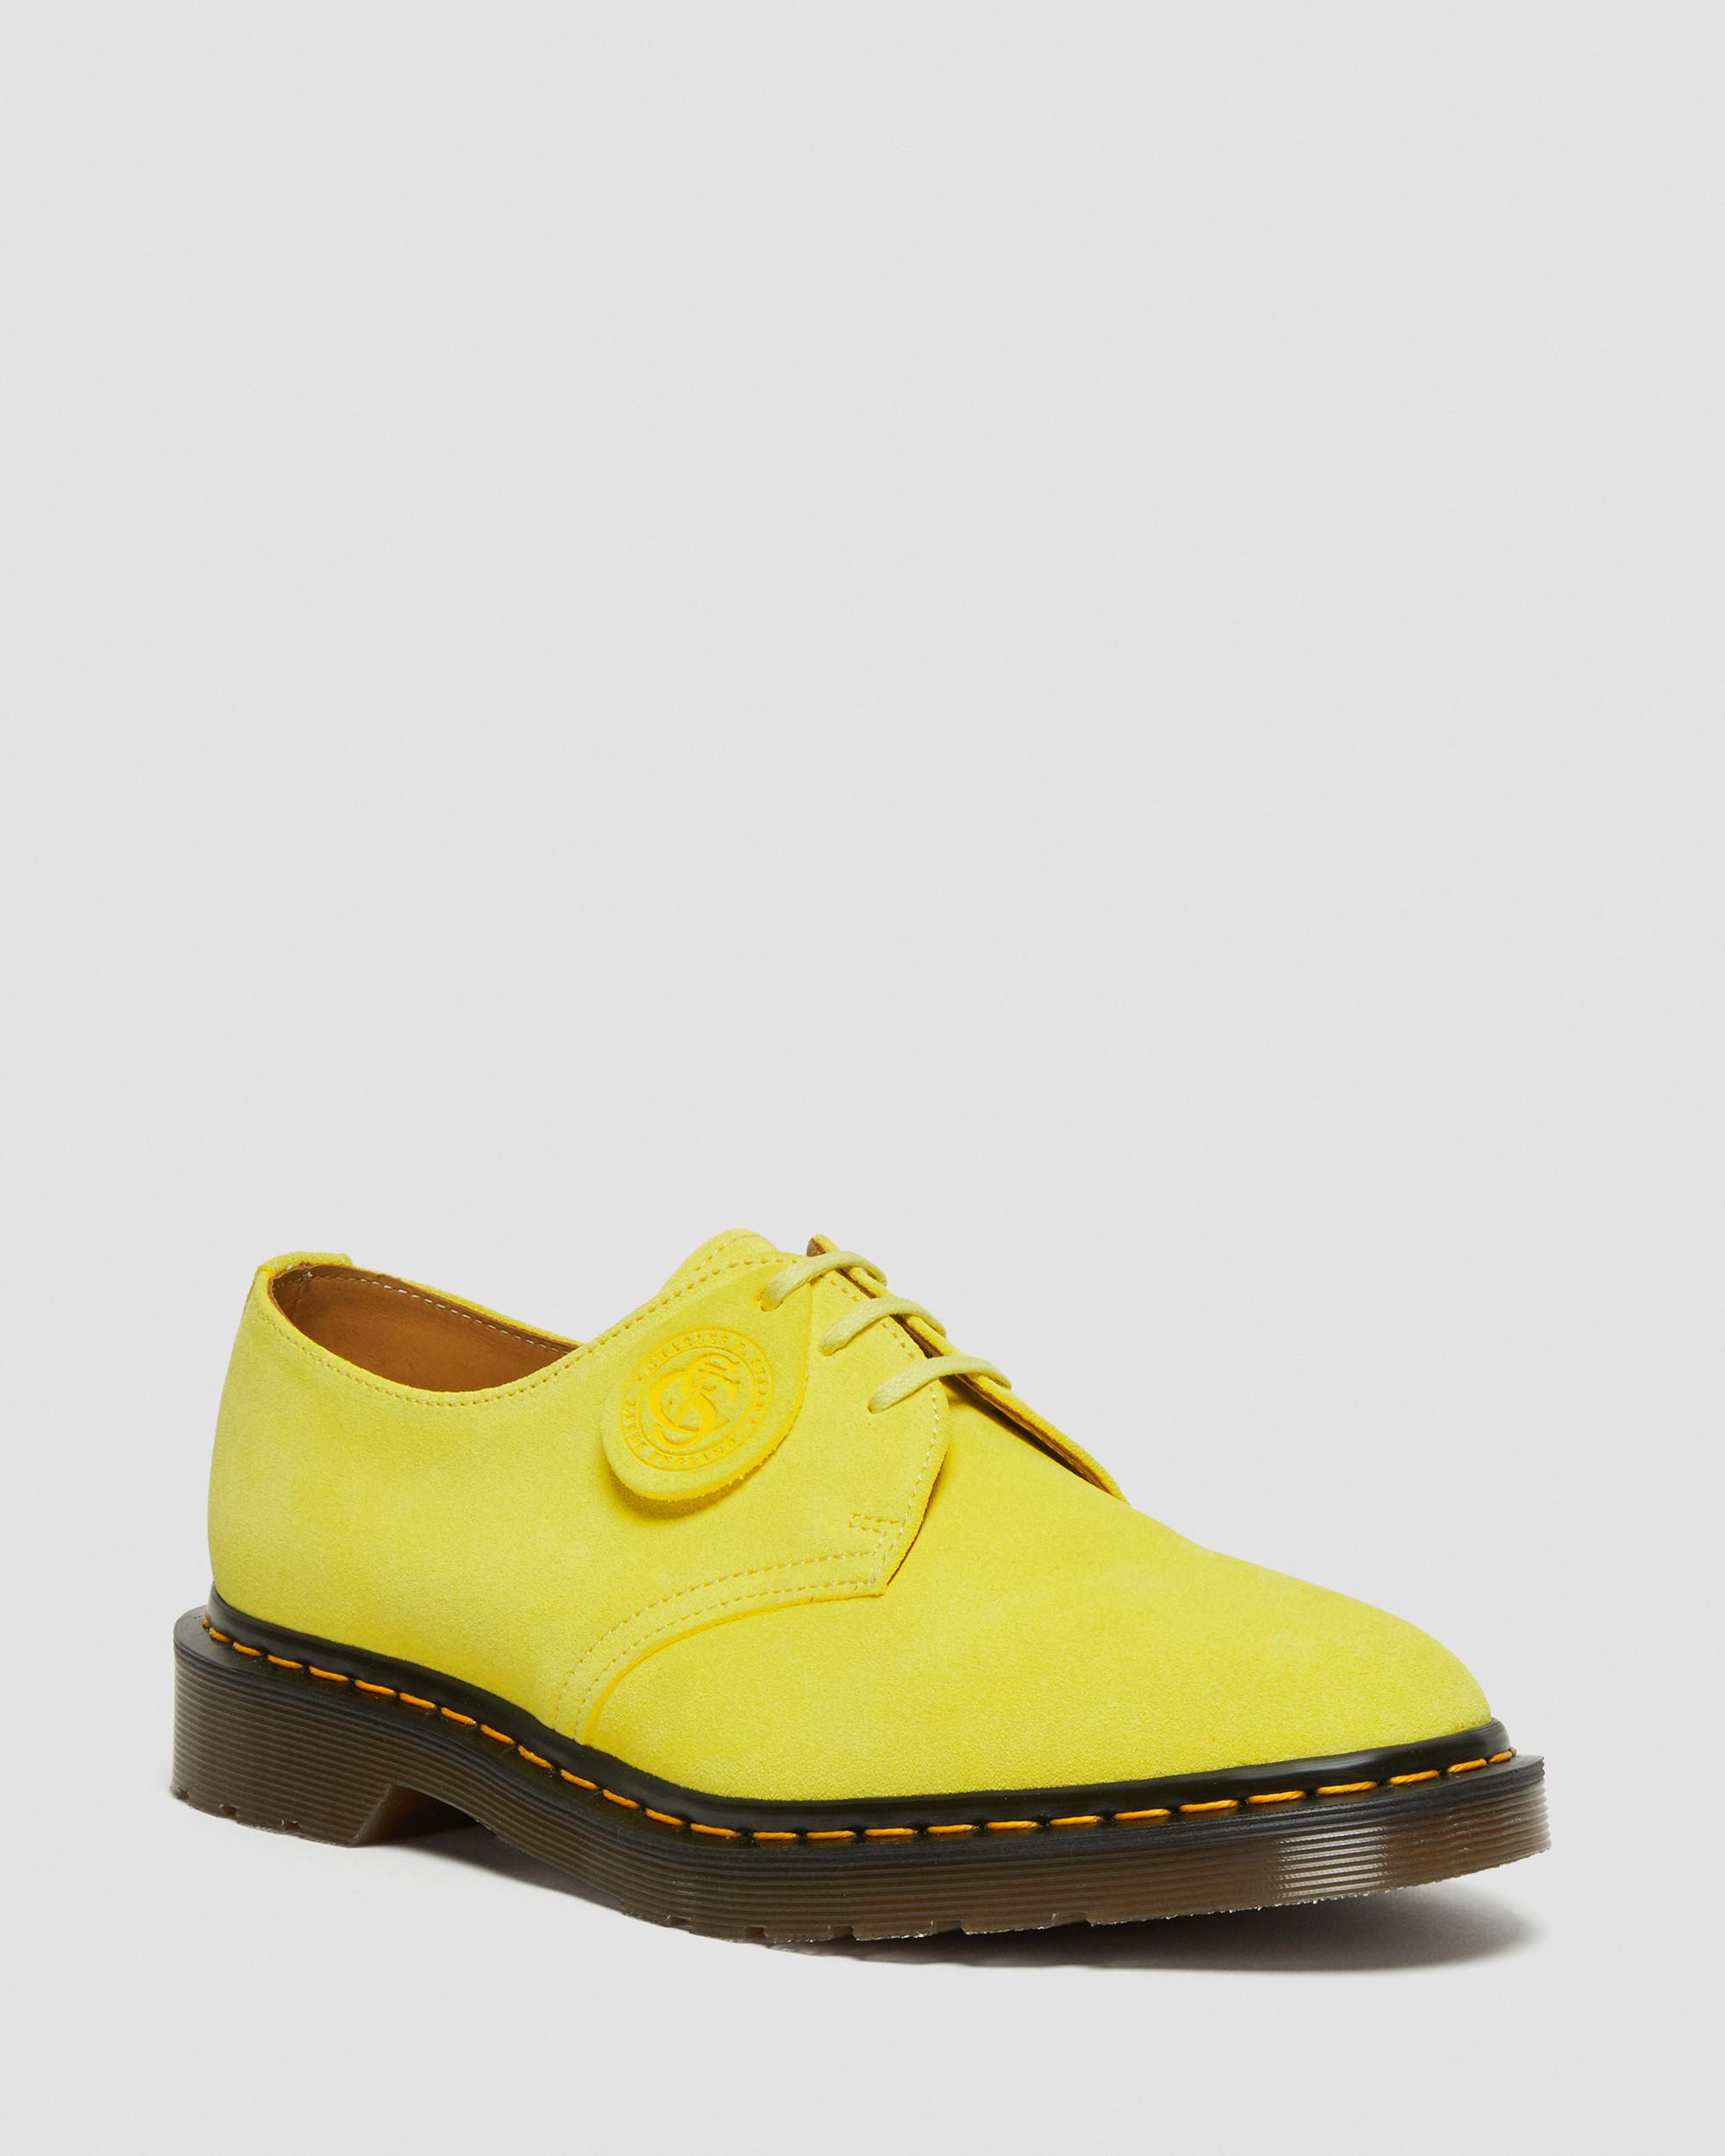 DR MARTENS 1461 Made in England Buck Suede Oxford Shoes